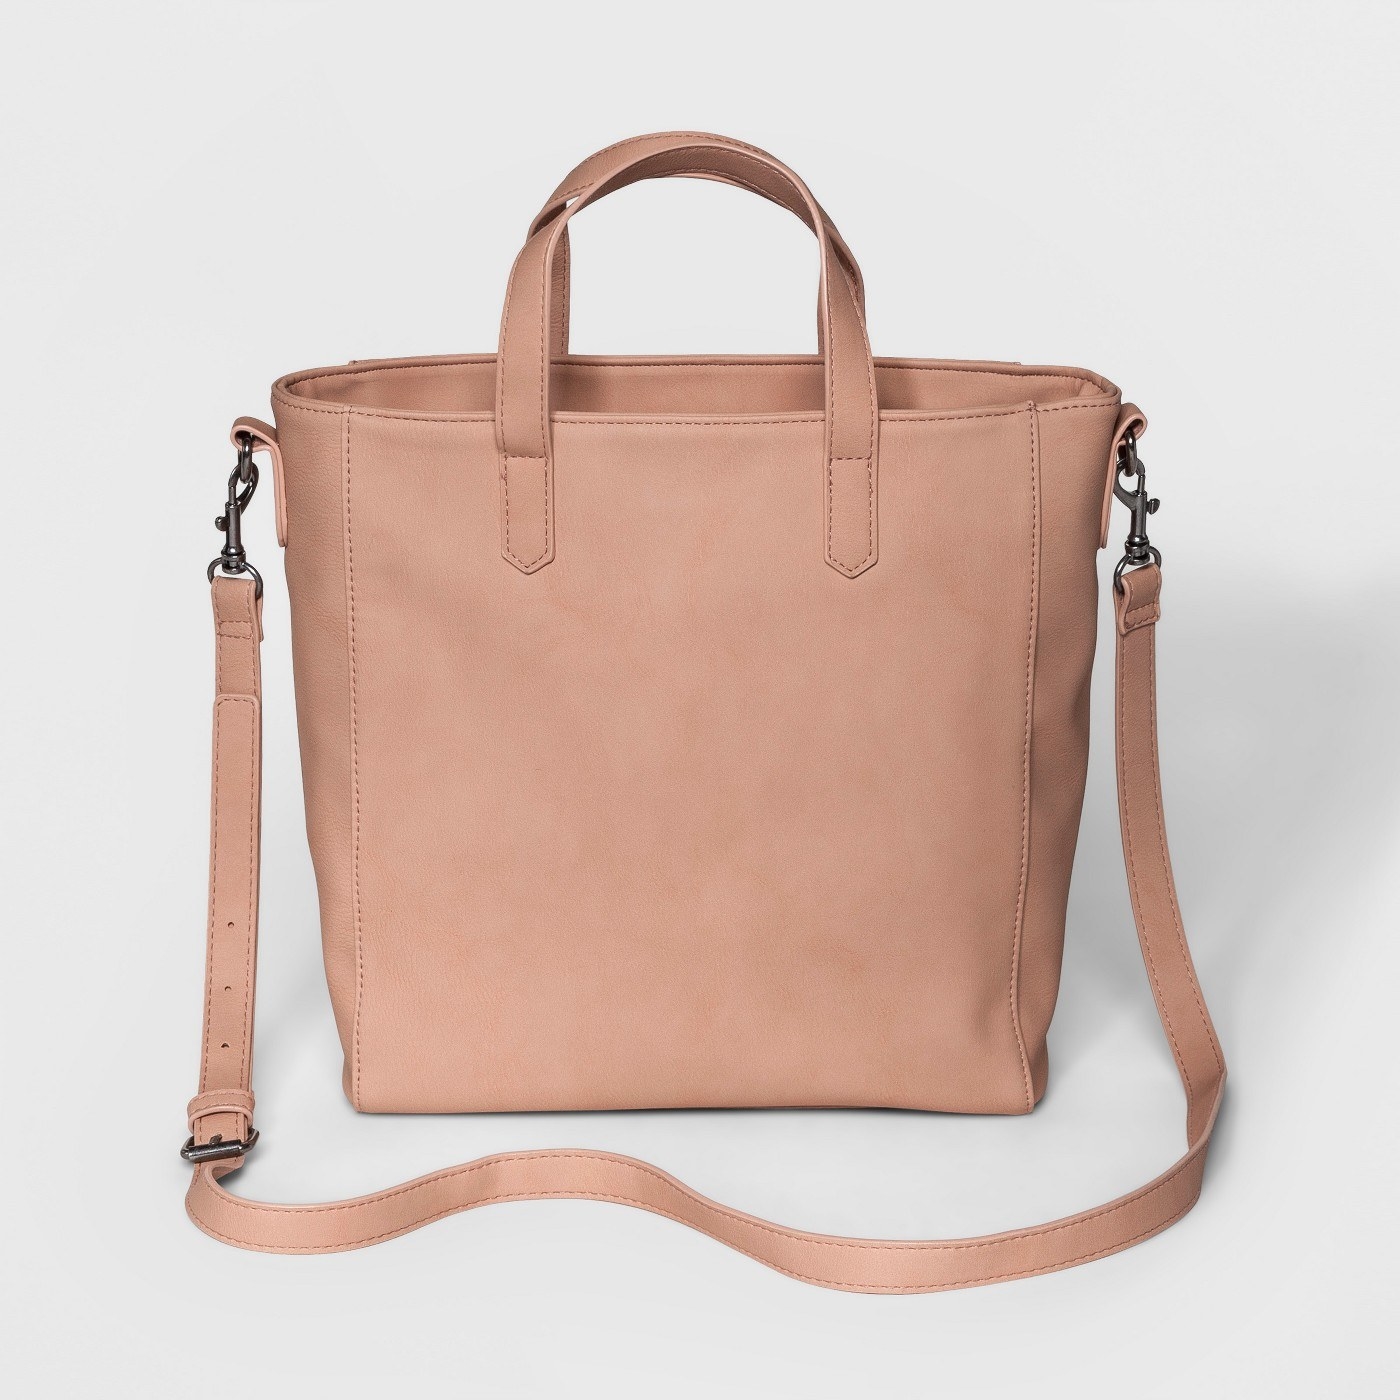 bag with lots of compartments